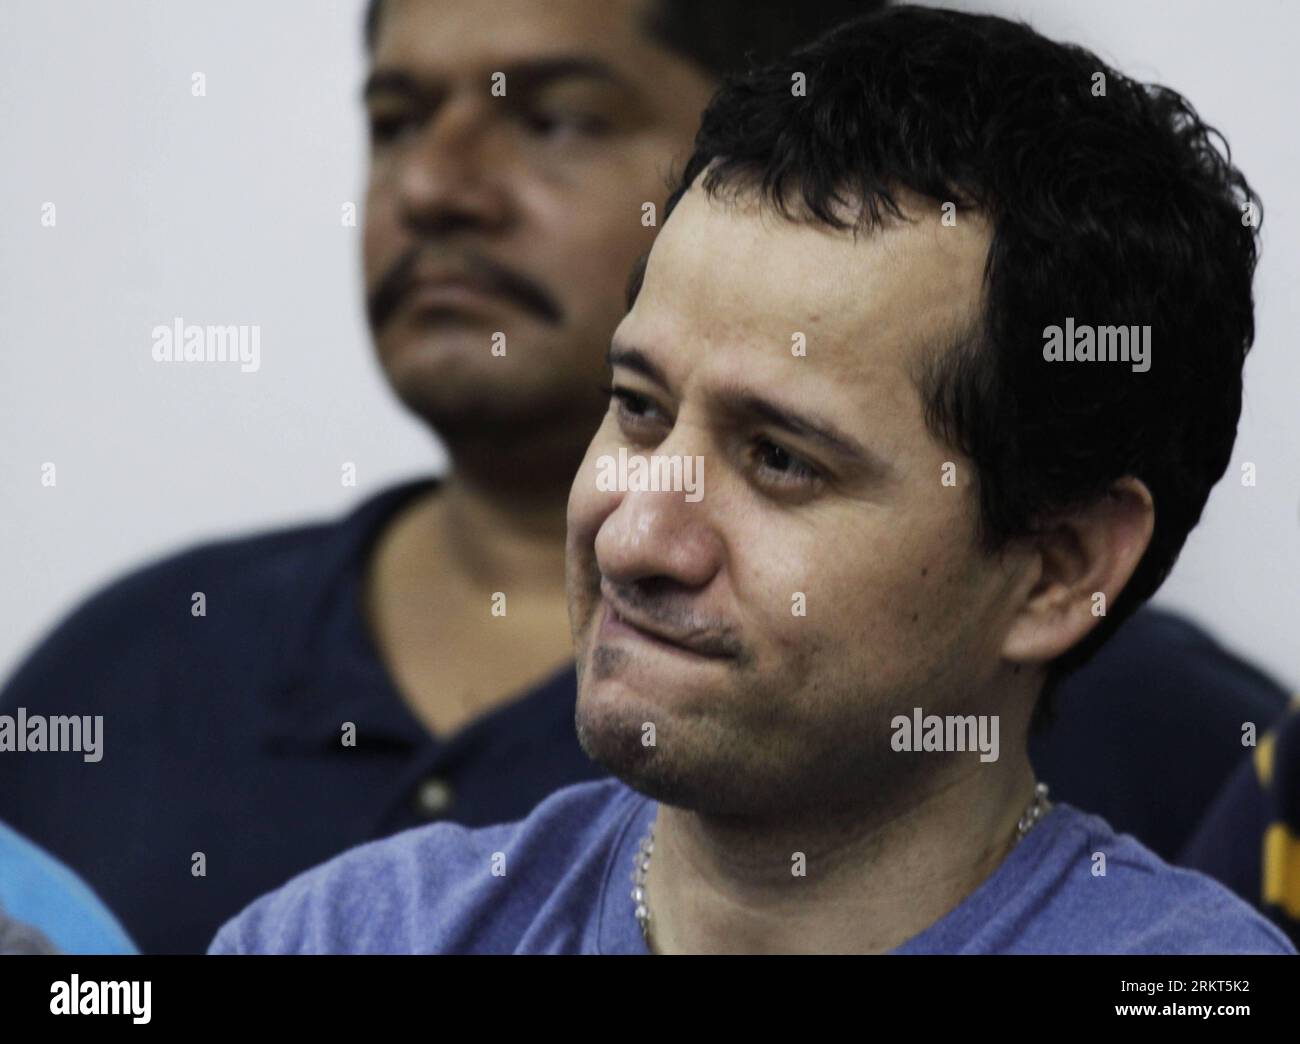 Bildnummer: 58378016  Datum: 22.08.2012  Copyright: imago/Xinhua Nicaraguan businessman Henry Farinas attends a hearing in Managua, Nicaragua, on Aug. 22, 2012. Nicaraguan prosecutor said that Henry Farinas was alleged of the attack that killed Argentine singer and songwriter Facundo Cabral on July 9, 2011, and accuses him of drug trafficking, money laundering and organized crime association. (Xinhua/John Bustos) (bxq) NICARAGUA-MANAGUA-HENRY FARINAS-HEARING PUBLICATIONxNOTxINxCHN people Kriminalität Justiz Prozess Drogenhändler Mord Falschaussage Porträt x0x xas premiumd 2012 quer     5837801 Stock Photo